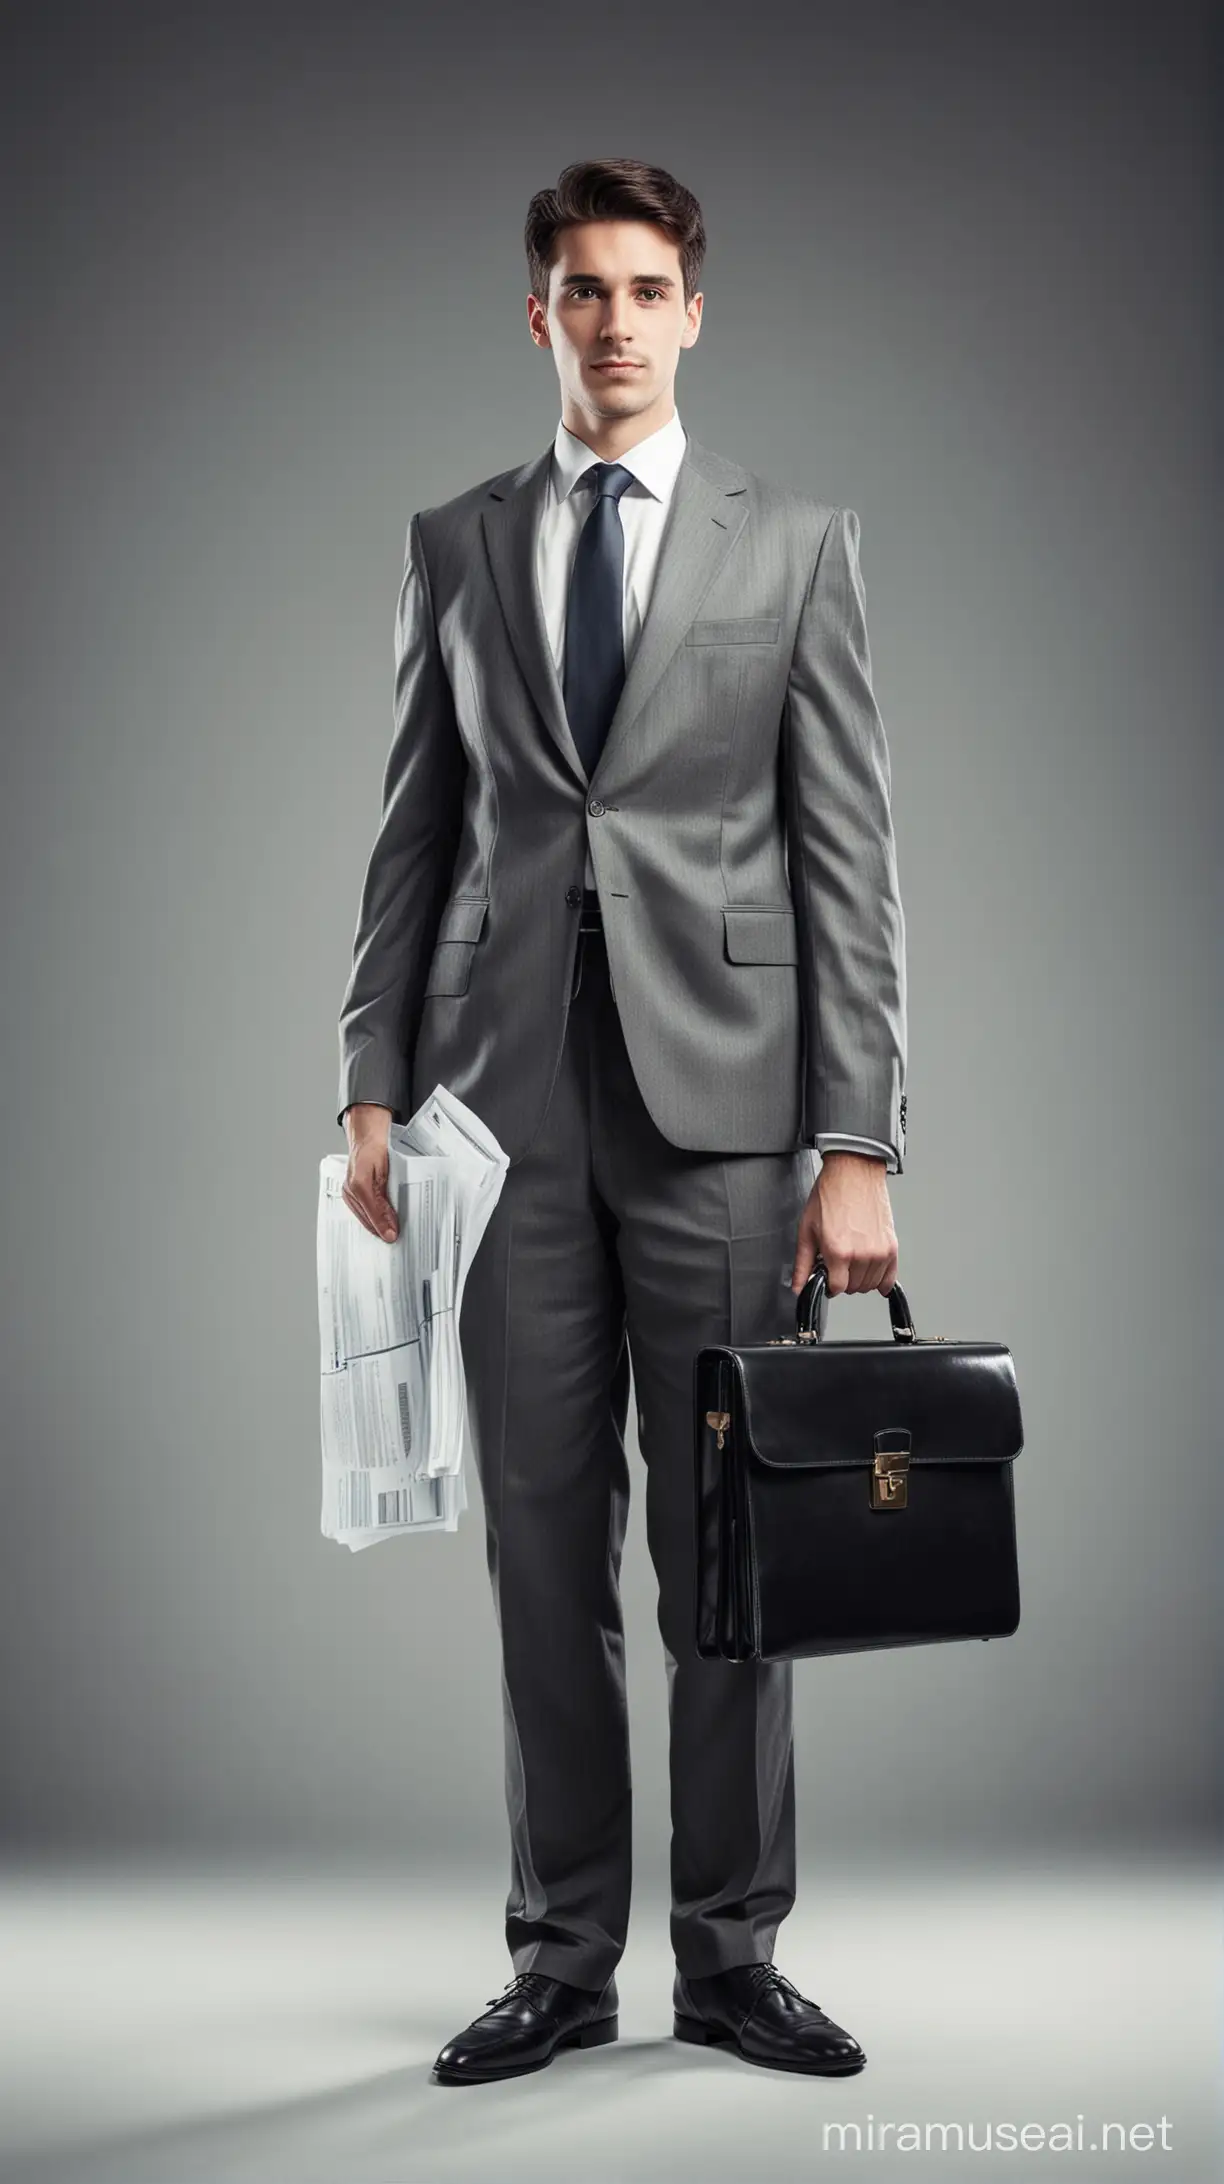 Confident Businessperson with Briefcase Symbolizing Financial Empowerment